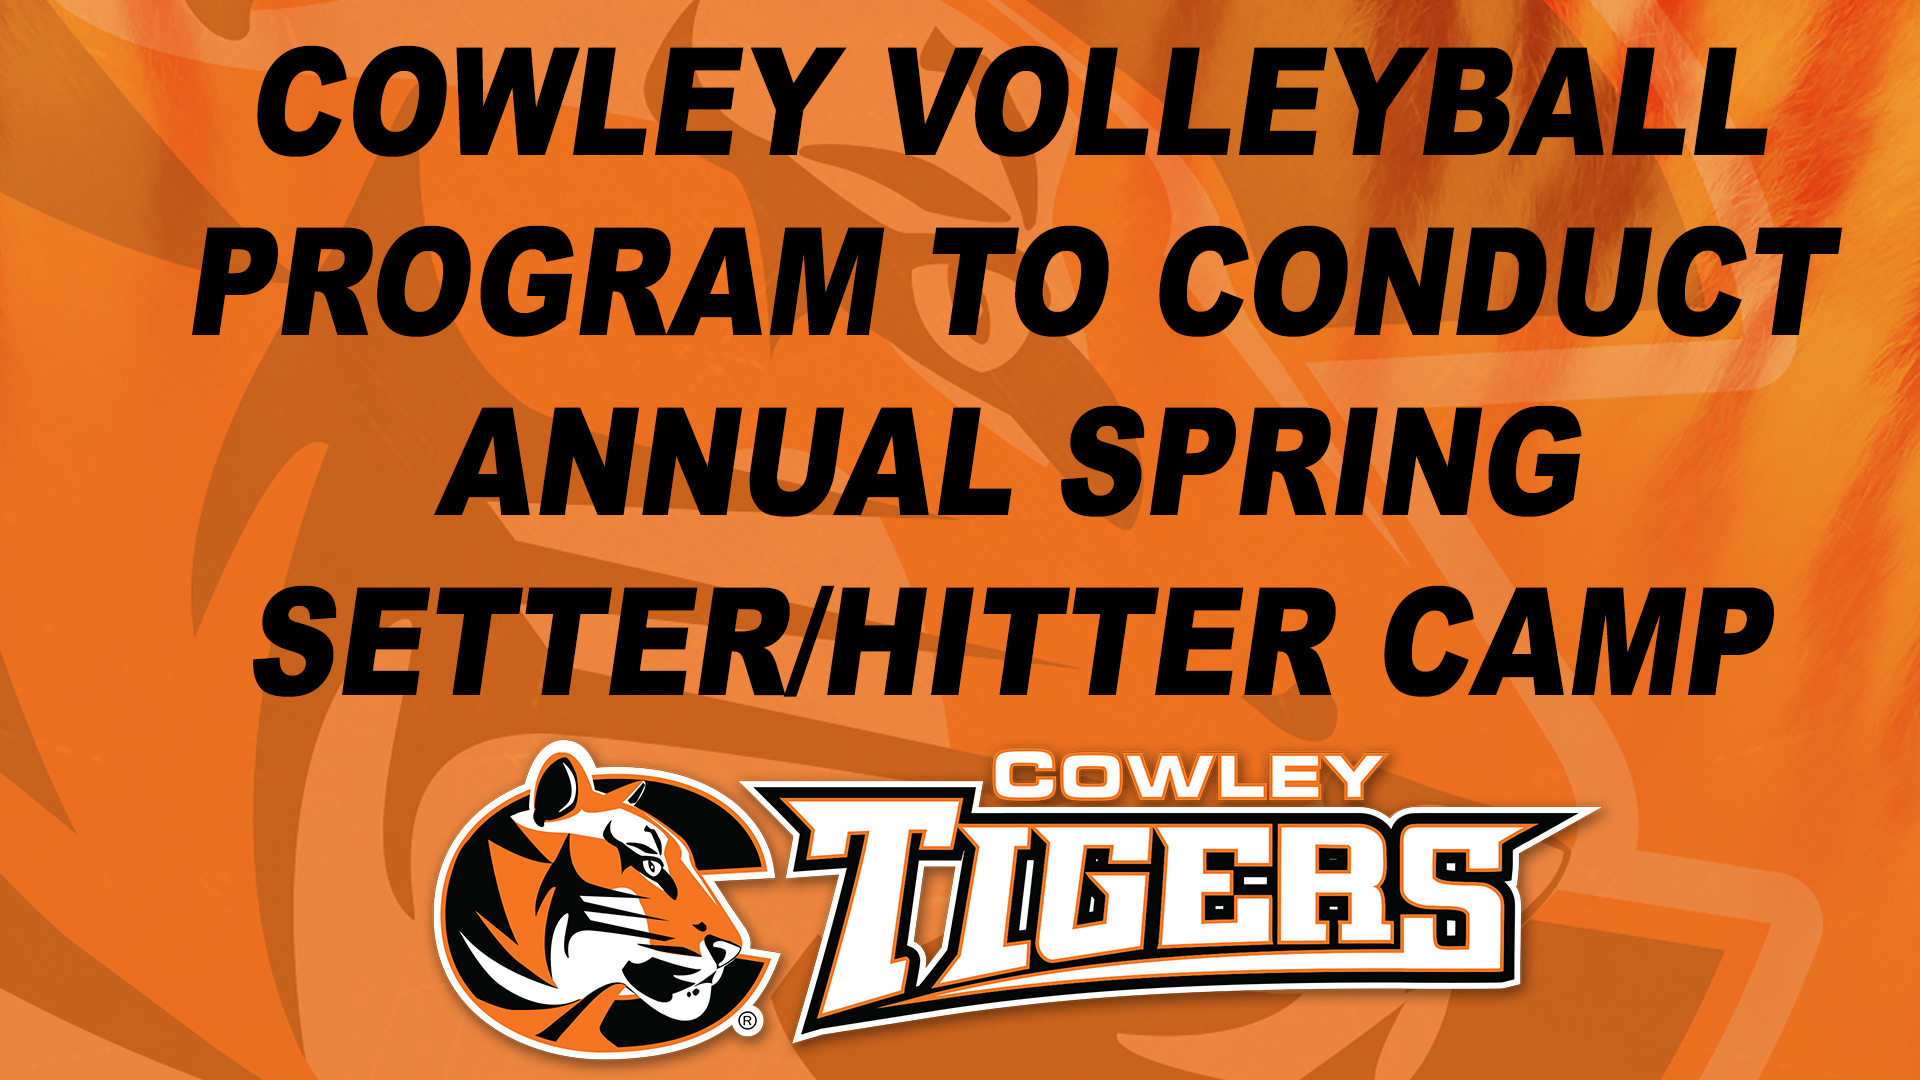 Cowley volleyball program to conduct annual spring setter/hitter camp